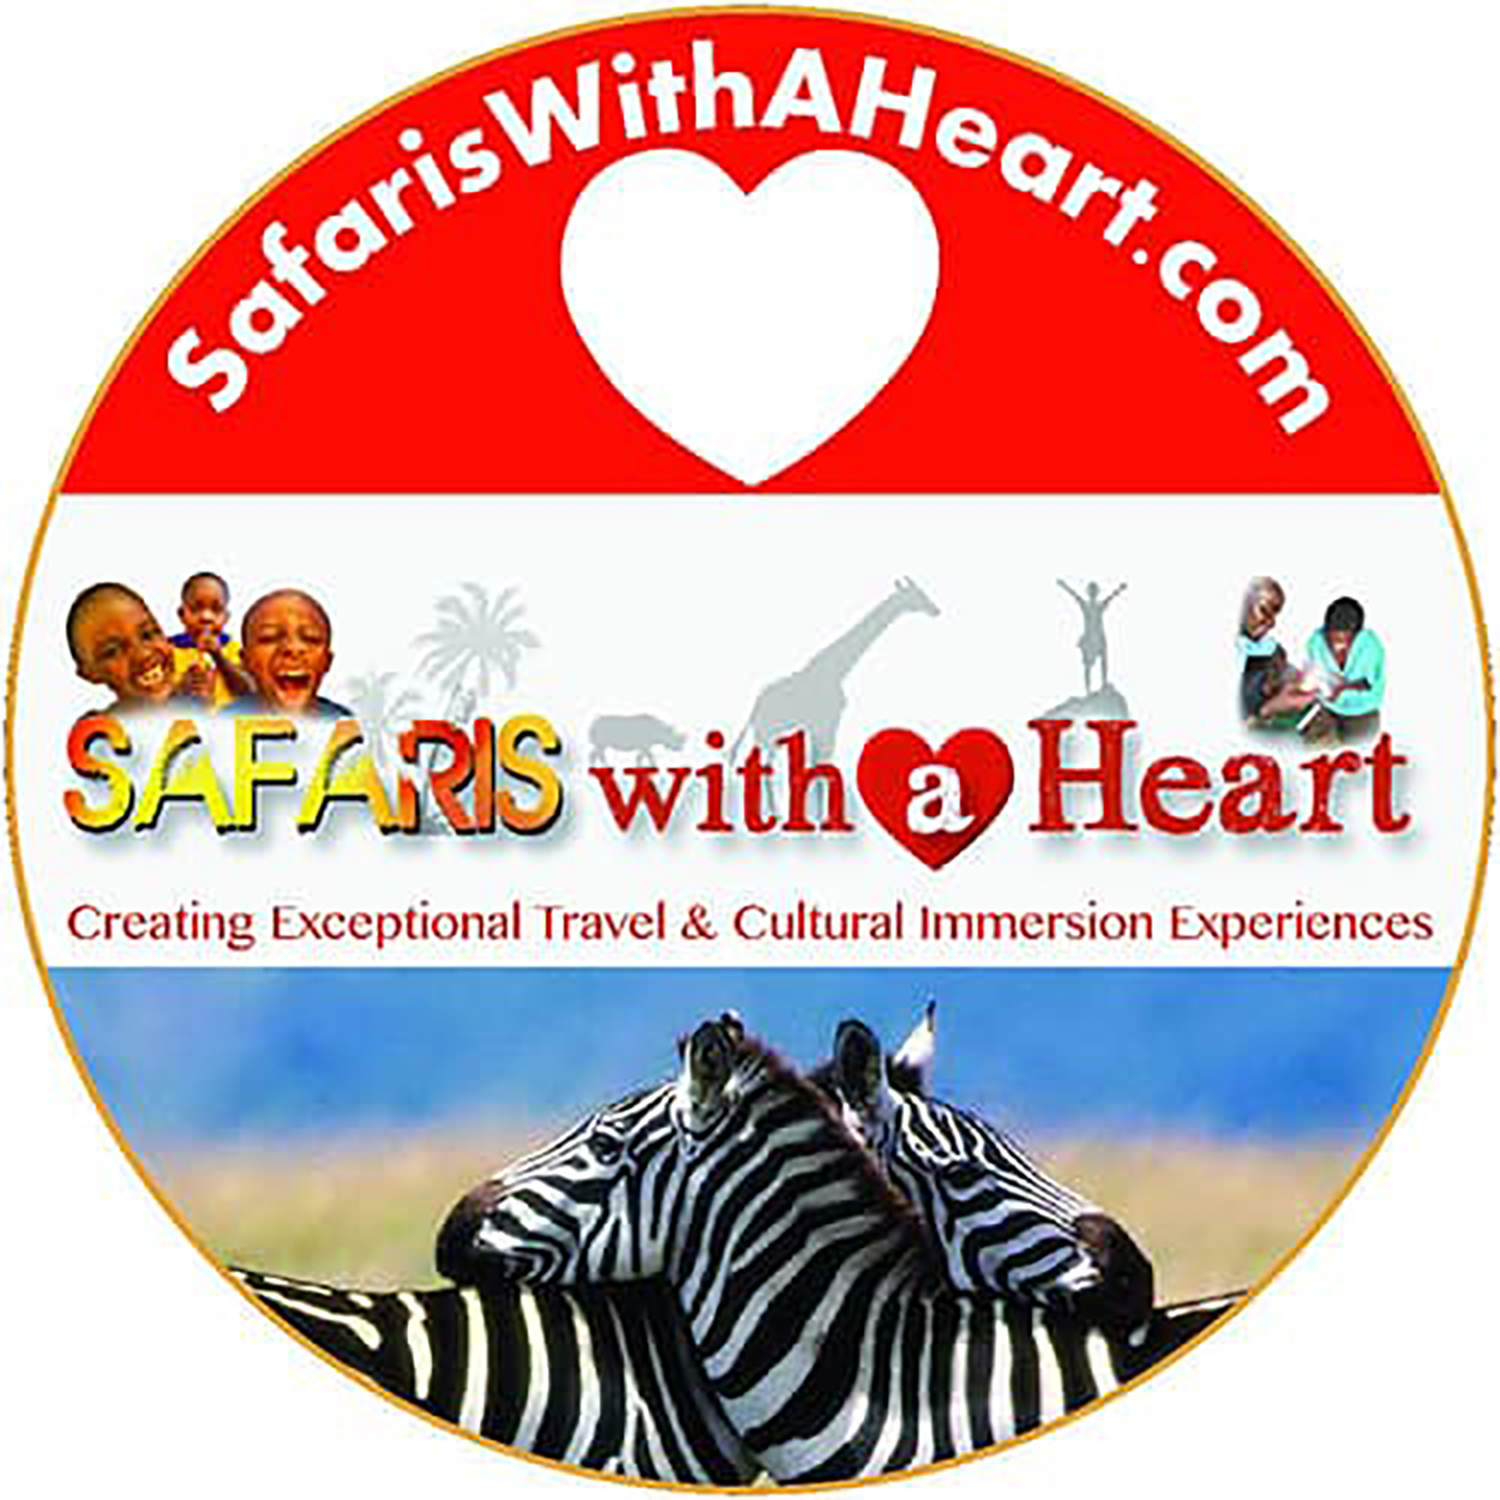 Tanzania Stories brought to you by Safaris With A Heart